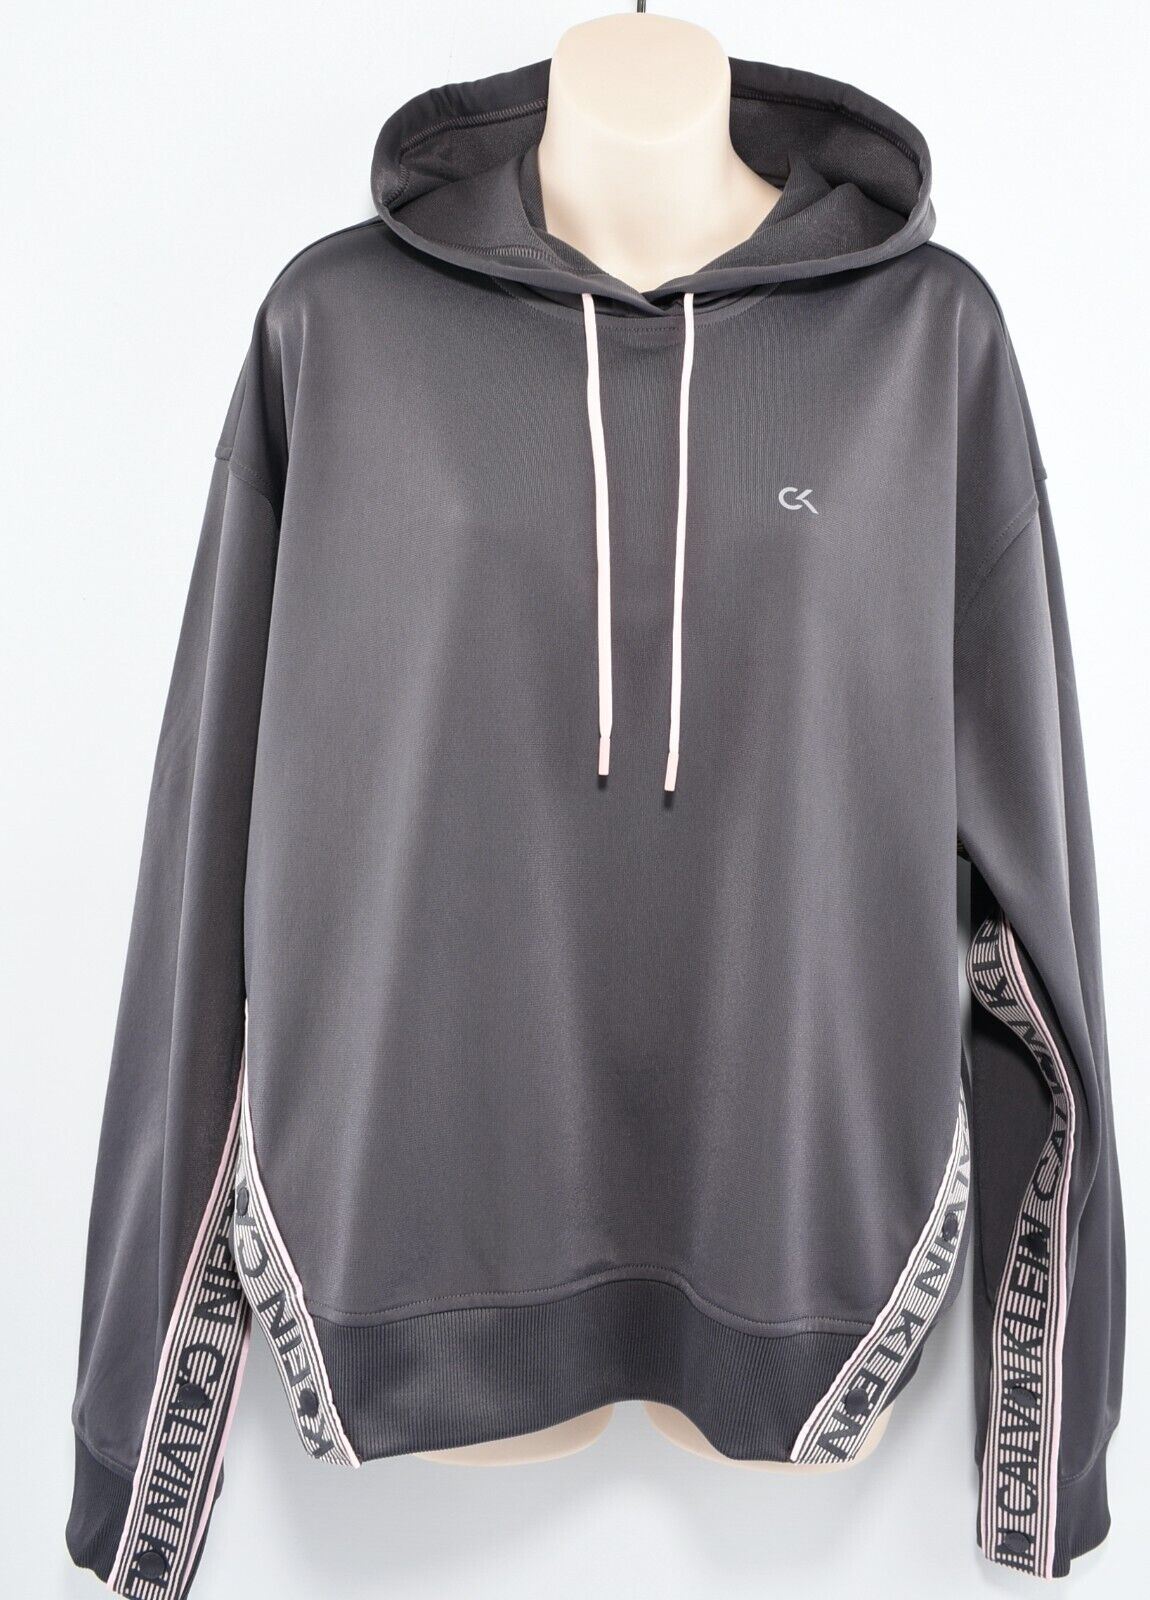 CALVIN KLEIN Performance - Women's Relaxed Fit Hoodie, Blackened Pearl, size XS